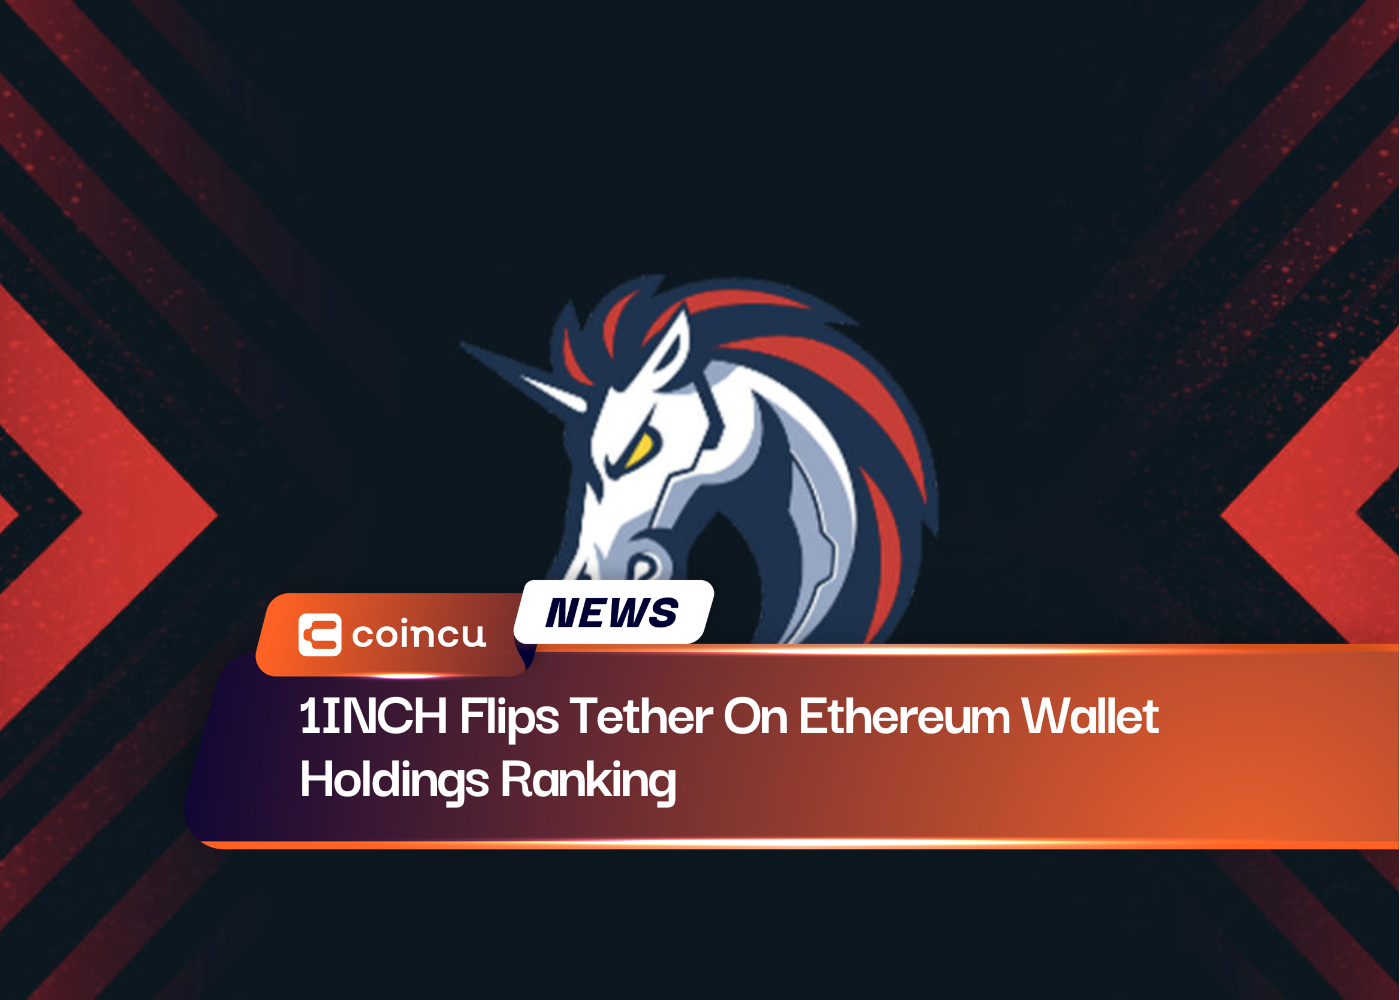 1INCH Flips Tether On Ethereum Wallet Holdings Ranking